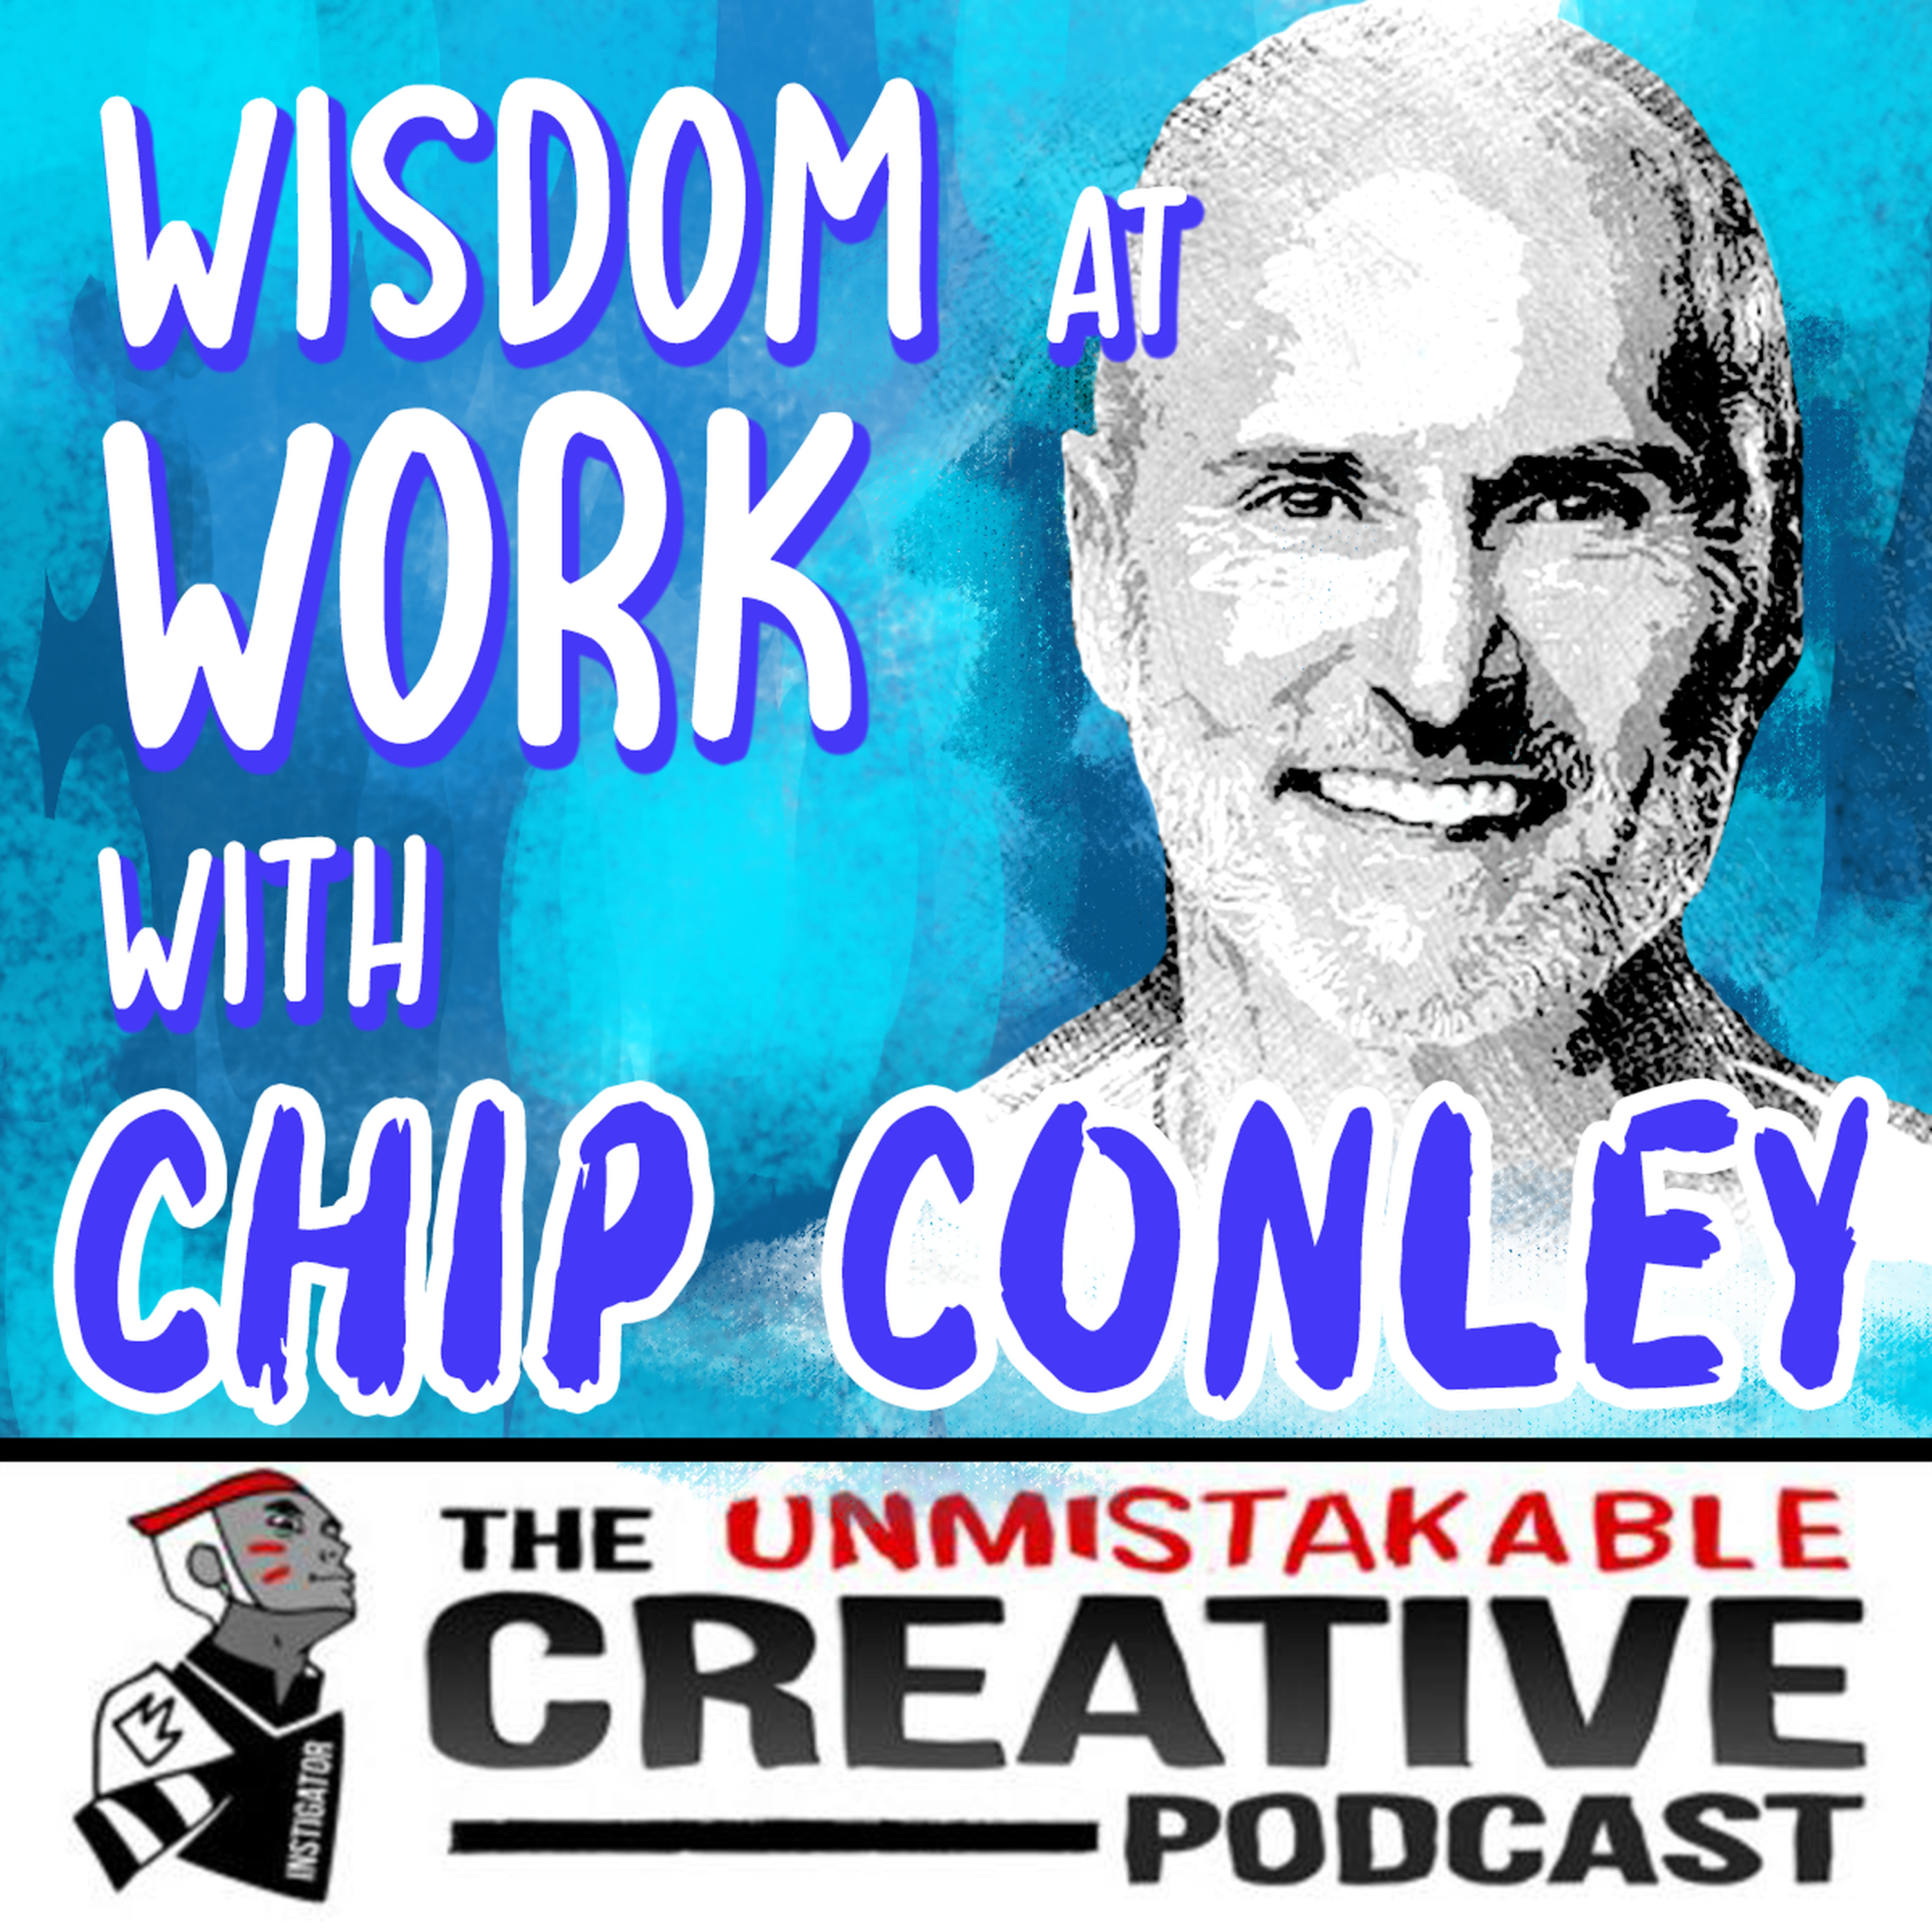 Wisdom at Work with Chip Conley Image